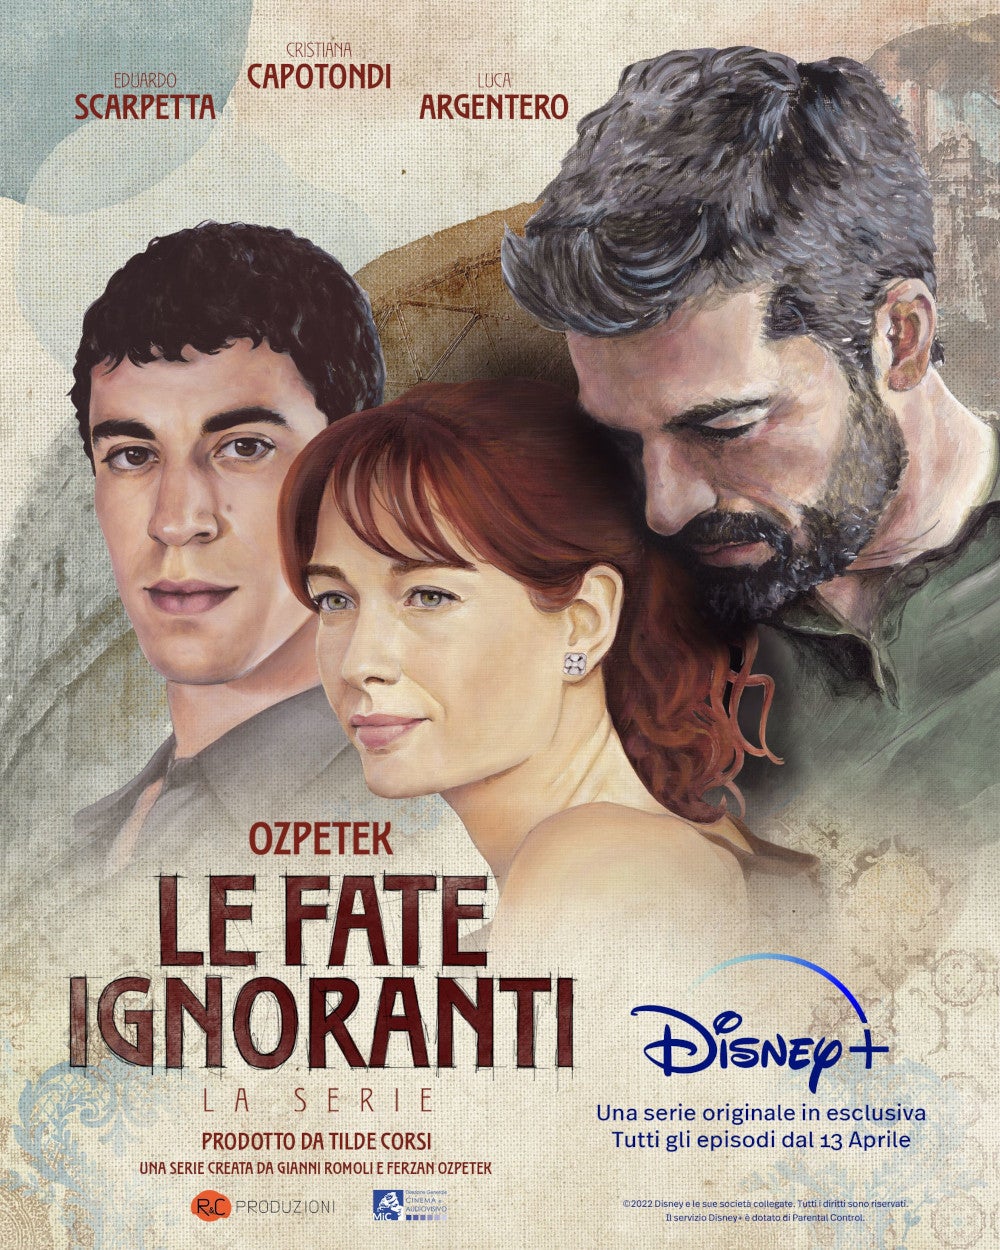 TV ratings for The Ignorant Angels (Le Fate Ignoranti) in France. Disney+ TV series